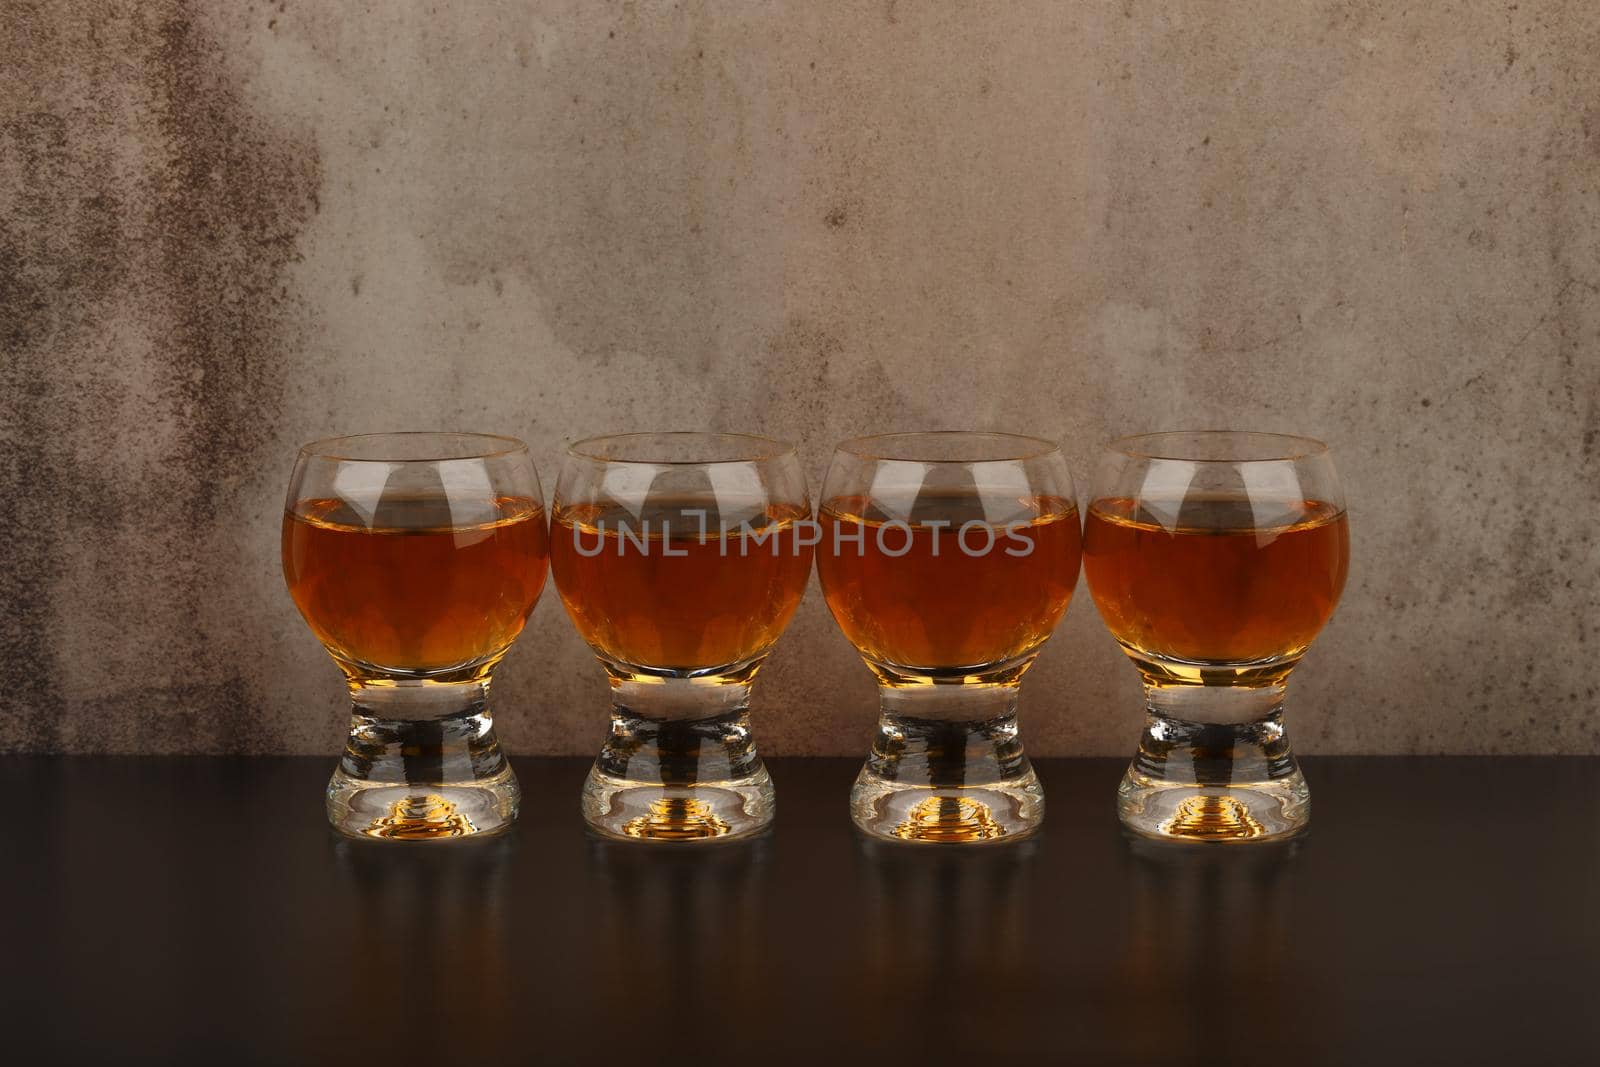 Still life with glass shots in a row on black table against marble background with copy space. Concept of celebration, bar or restaurant with cocktail menu and other alcoholic drinks